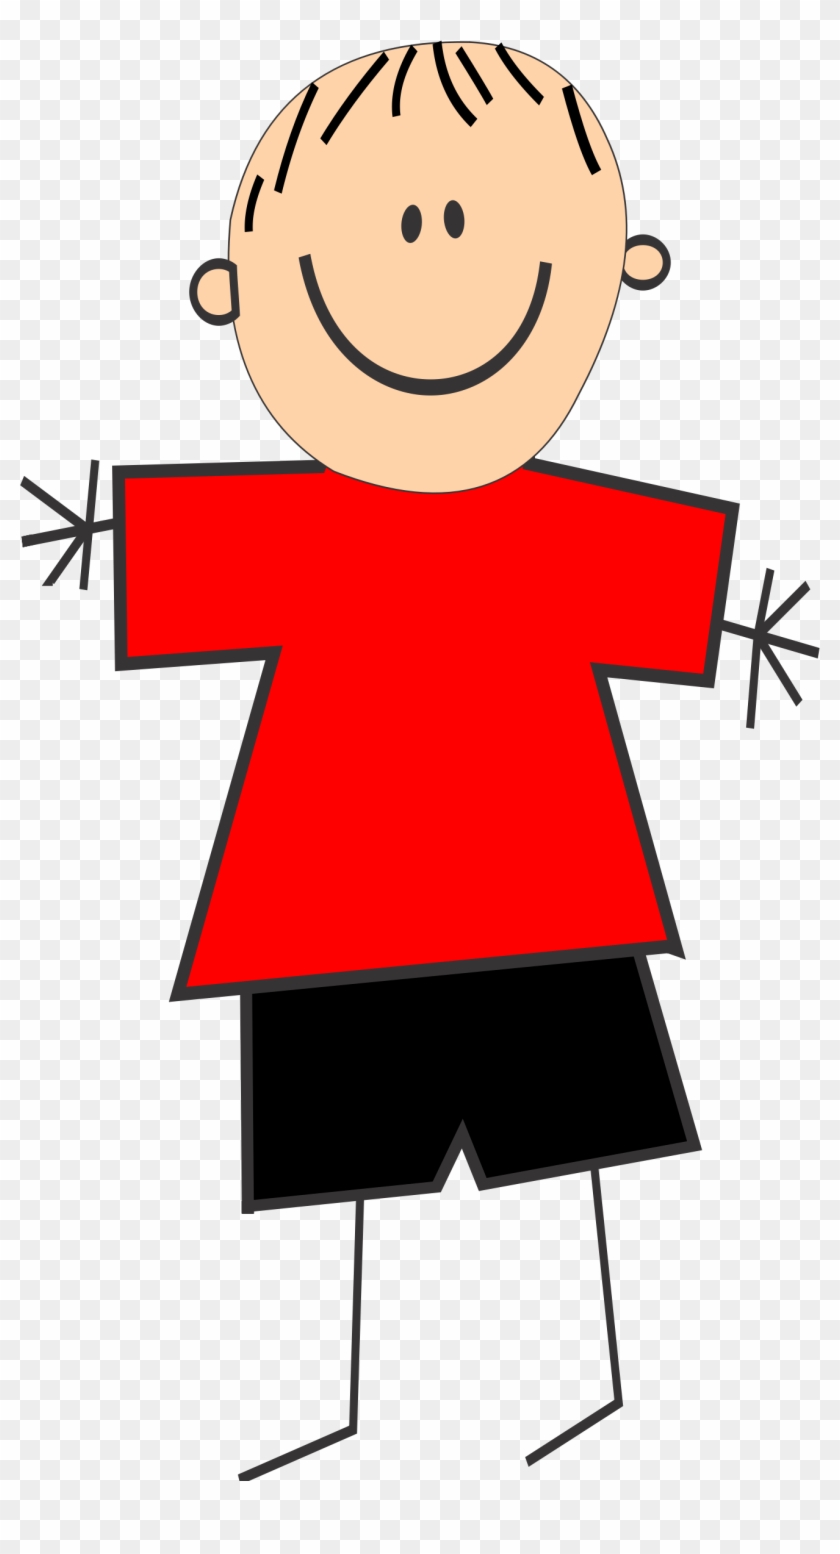 With Red Shirt - Boy With Red Shirt Clipart #288122